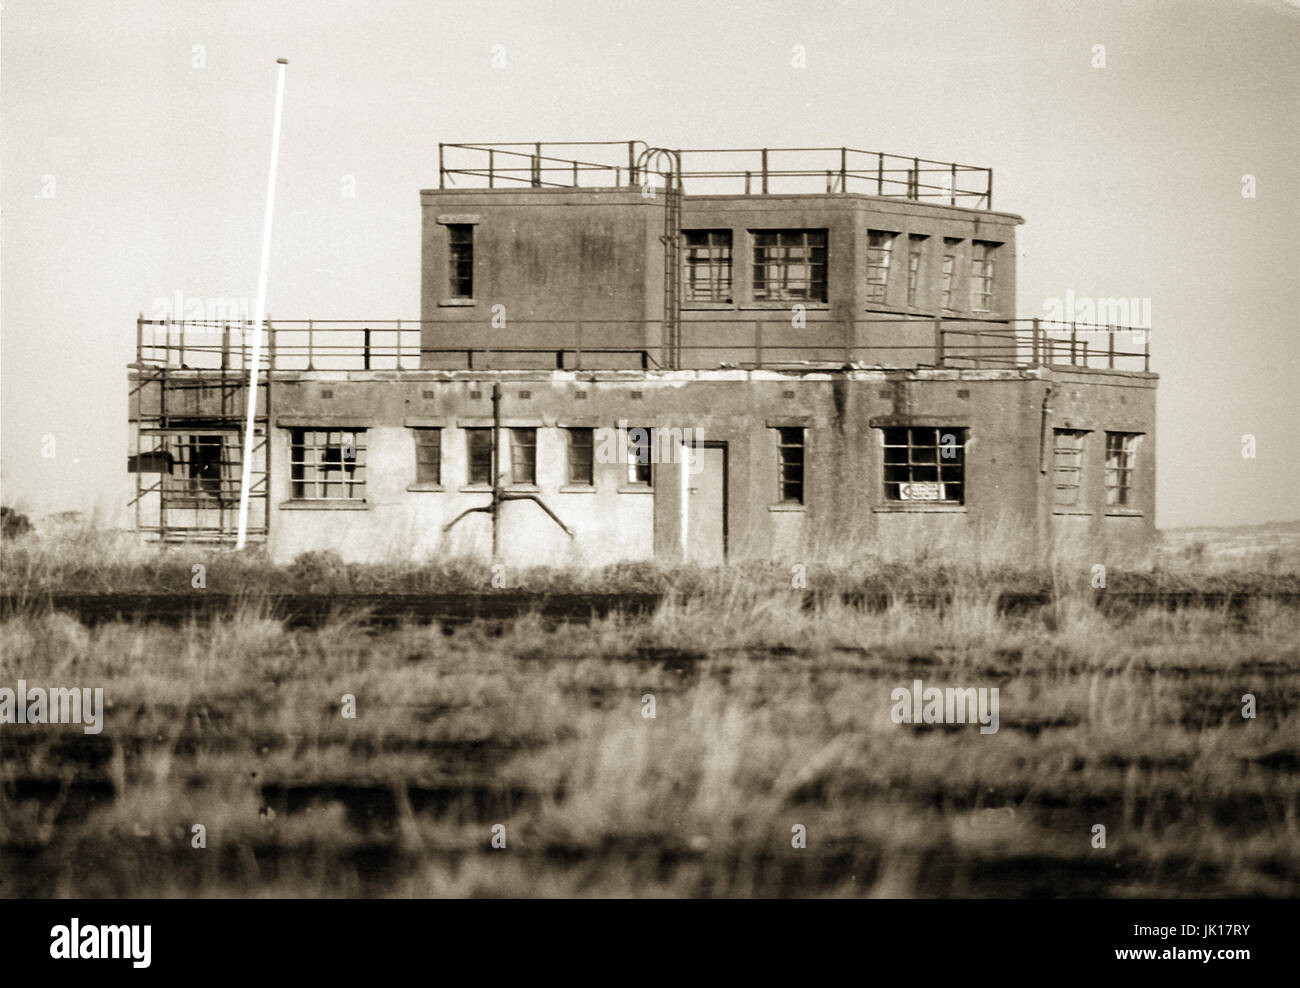 USAAF Langford lodge world war 2 military Airfield control tower Stock Photo